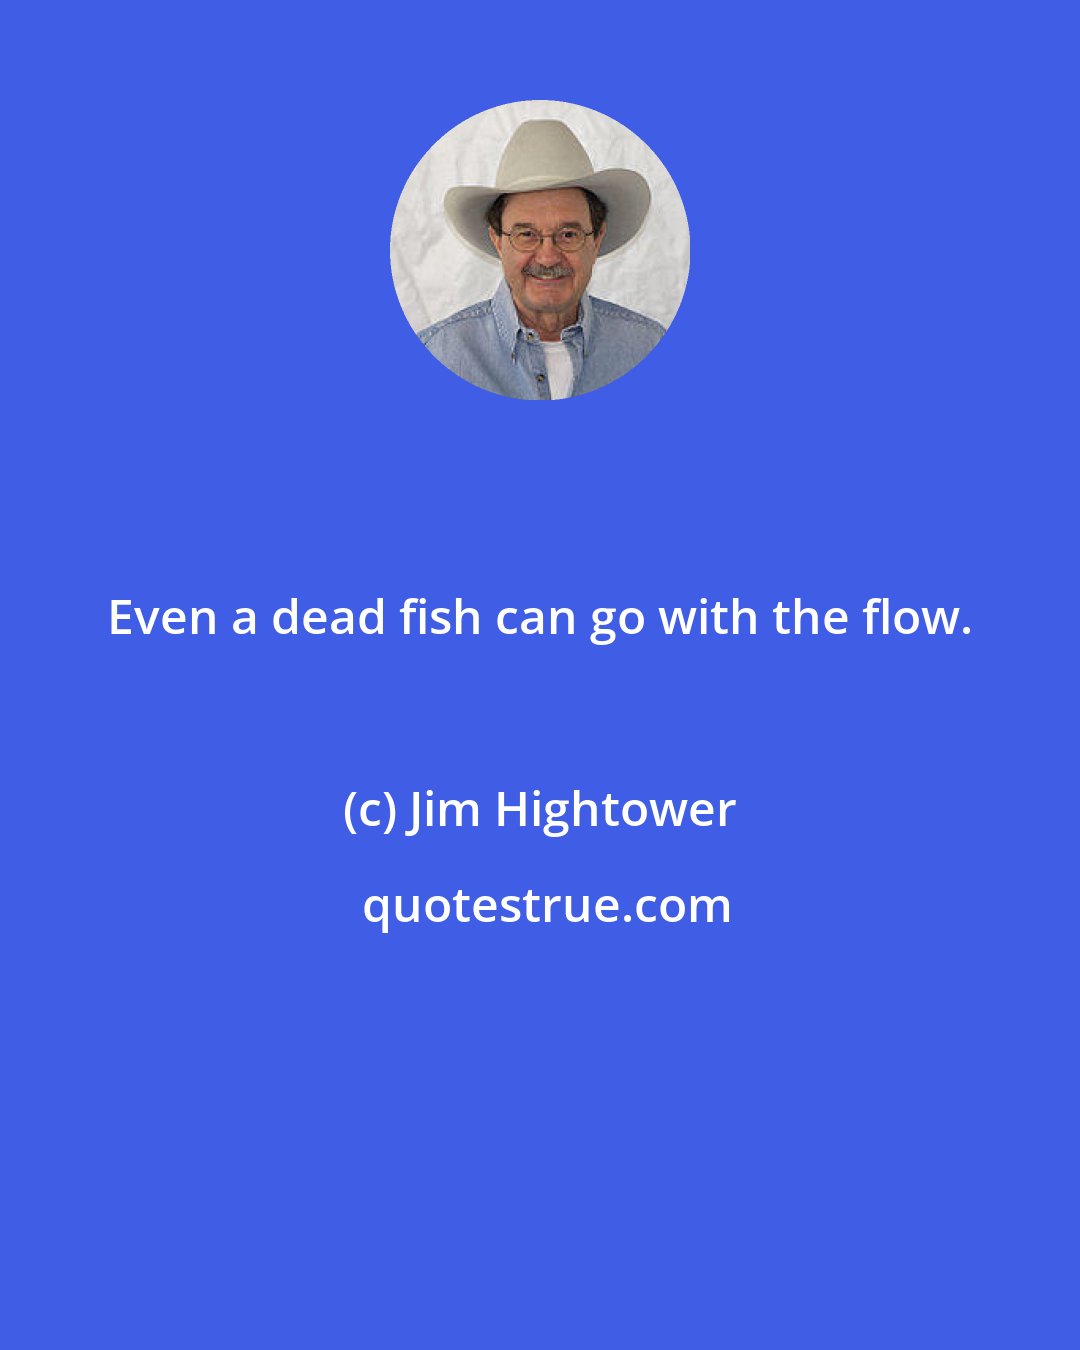 Jim Hightower: Even a dead fish can go with the flow.